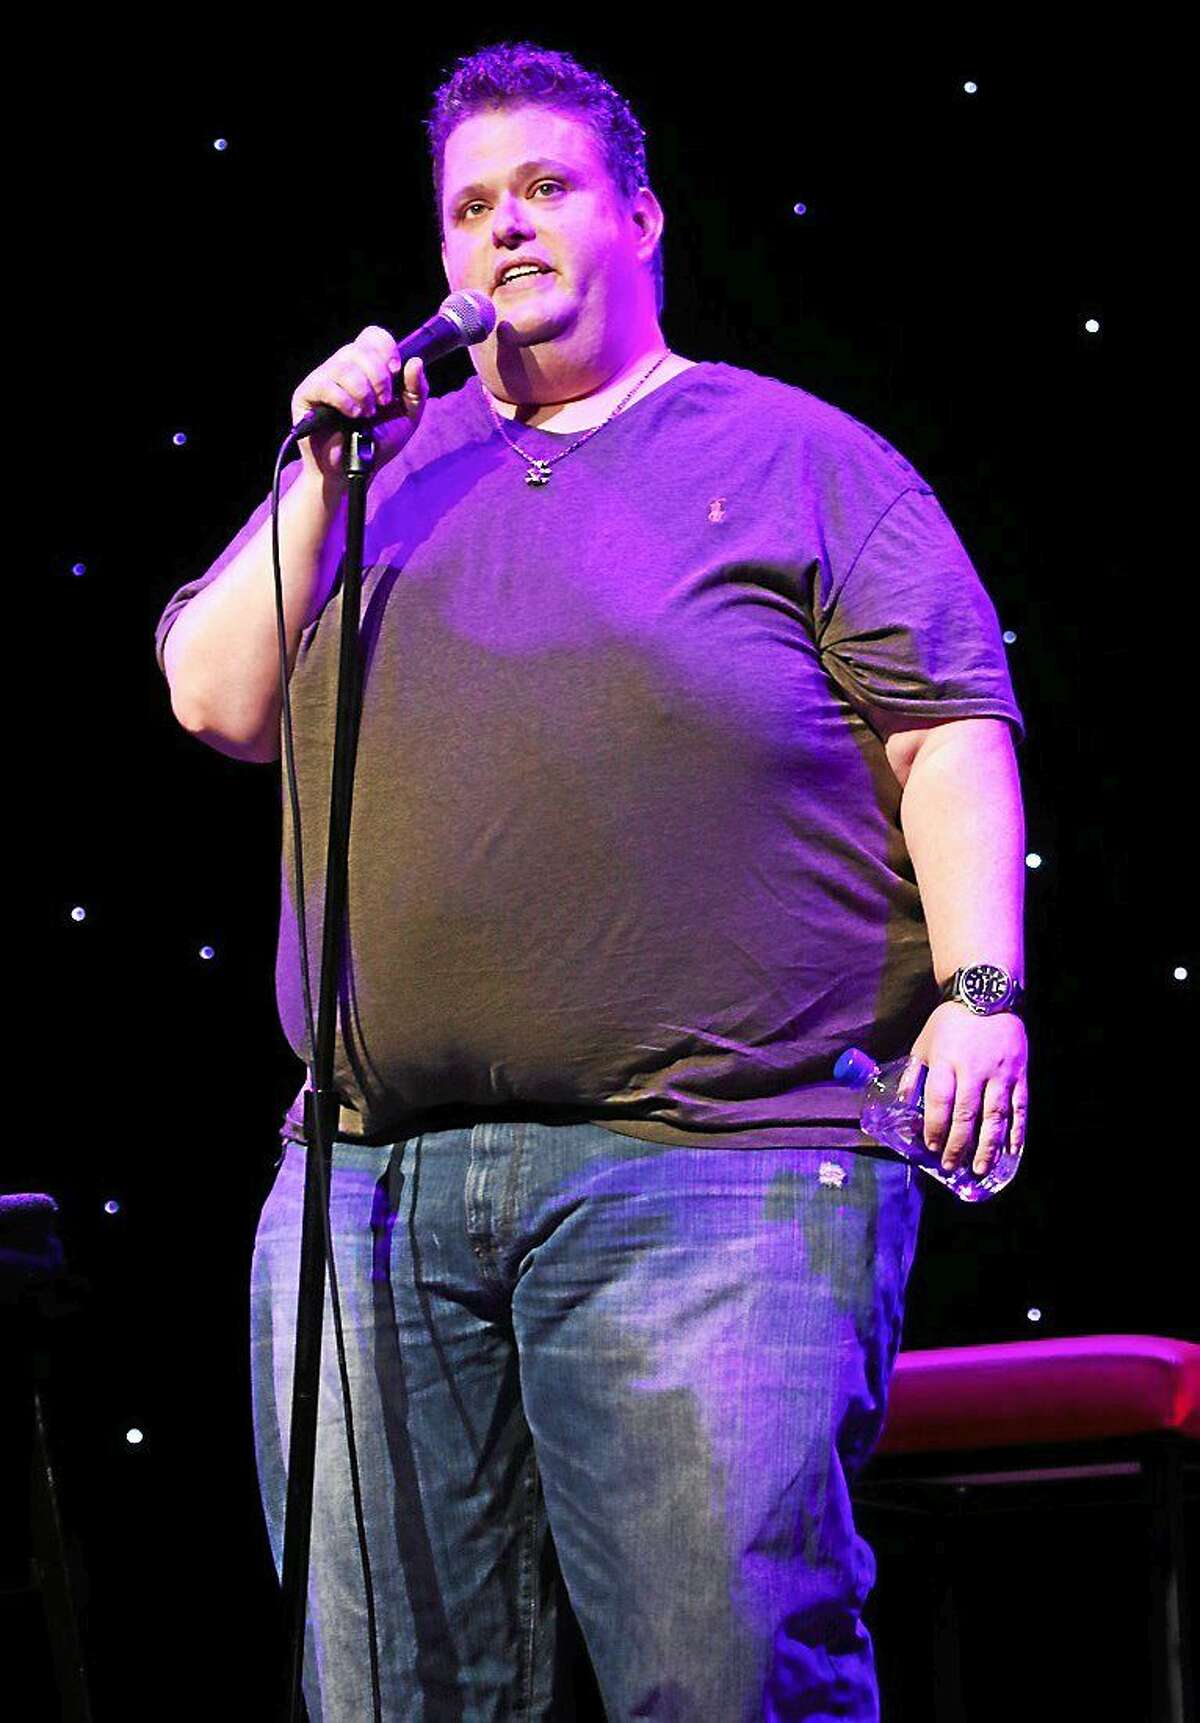 Photo by John Atashian Stand up comedian Ralphie May entertains a crowd of his fans while performing on stage at the Infinity Music Hall & Bistro in Hartford on April 26. Other upcoming comedy shows coming to Infinity in Hartford include The Boston Comedy Festival with Joe Carroll, Jack Lynch, Jim McCue and PJ Walsh on May 29, Liberty Comedy Presents ìLettermanís Favoritesî on June 26 and Ladies of Laughter on July 23. To view the long list of entertainment coming to Infinity Music Hall & Bistro in Hartford and Norfolk, visit www.infinityhall.com